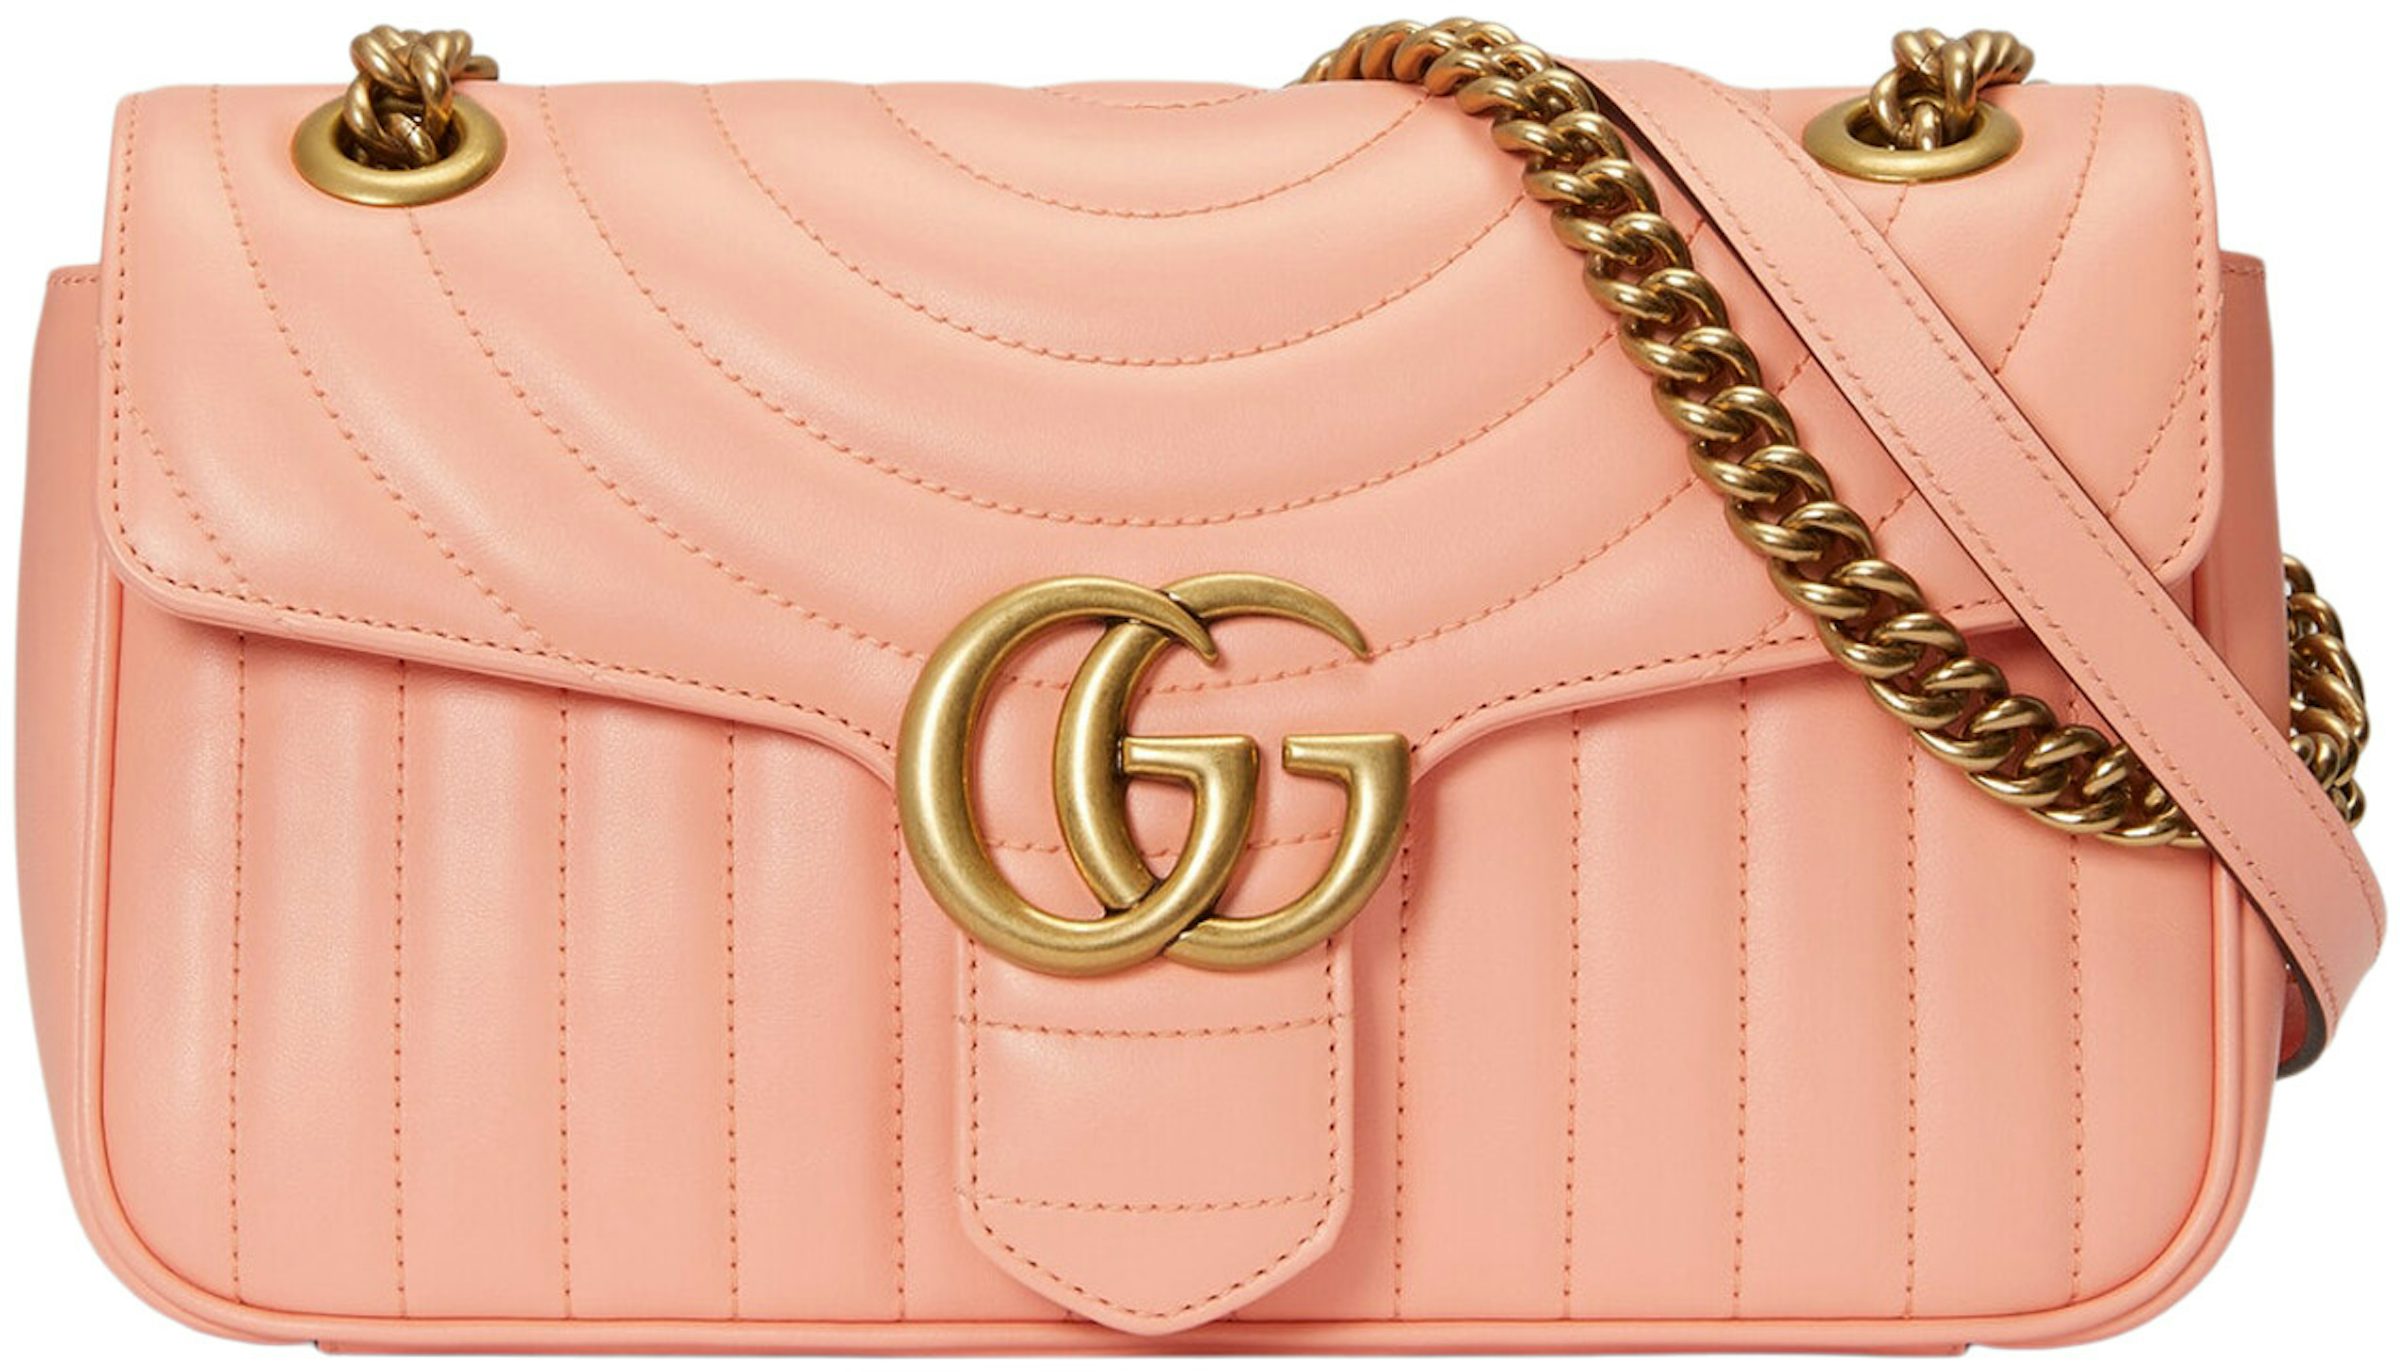 Gucci GG Marmont Small Shoulder Bag Matelassé Leather Dusty Pink